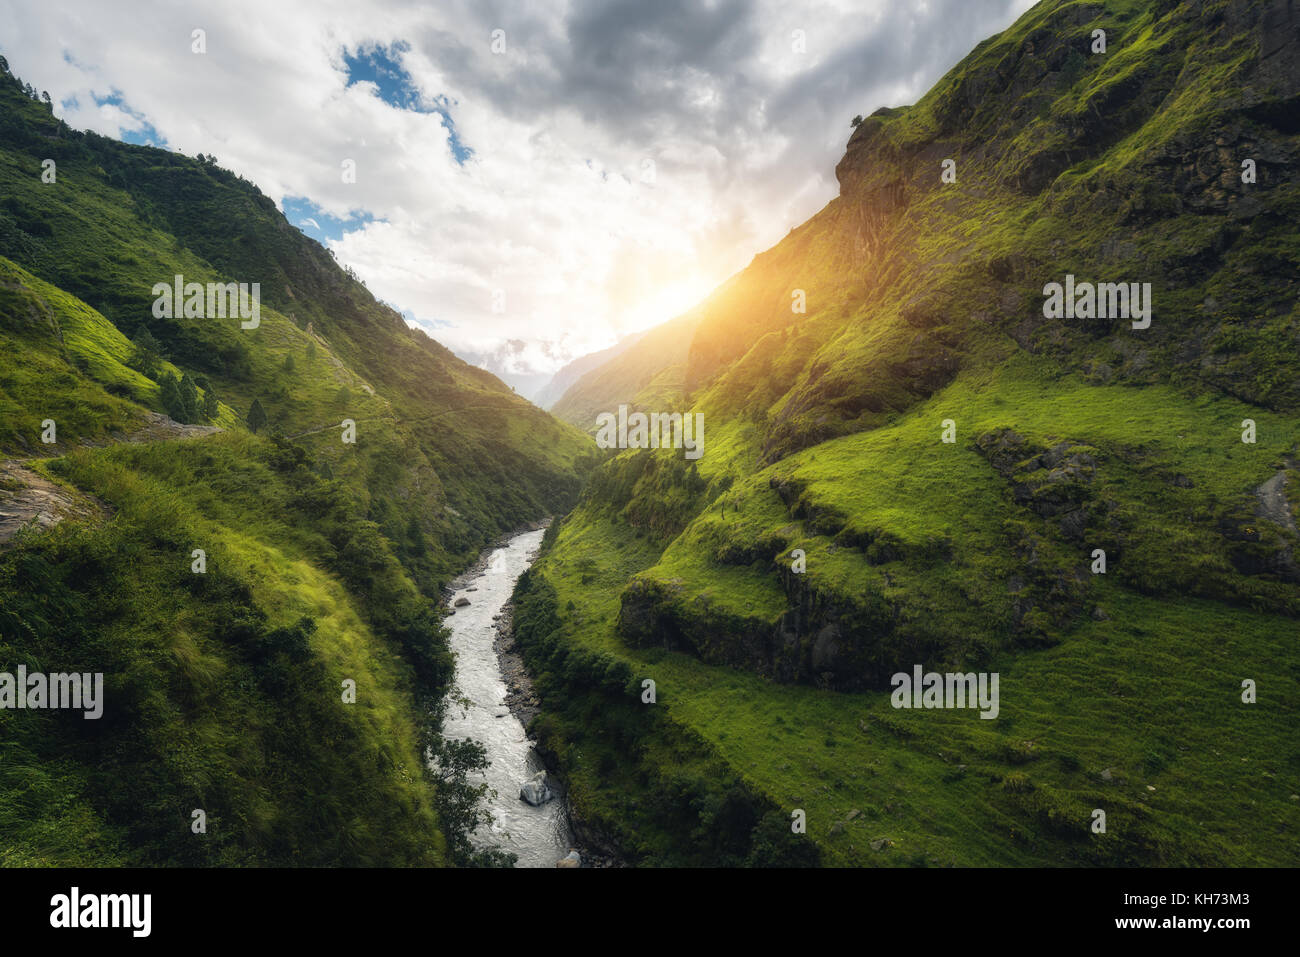 View with amazing Himalayan mountains covered green grass, river, meadows and forest, blue sky with clouds, sun and stones in water in autumn in Nepal Stock Photo